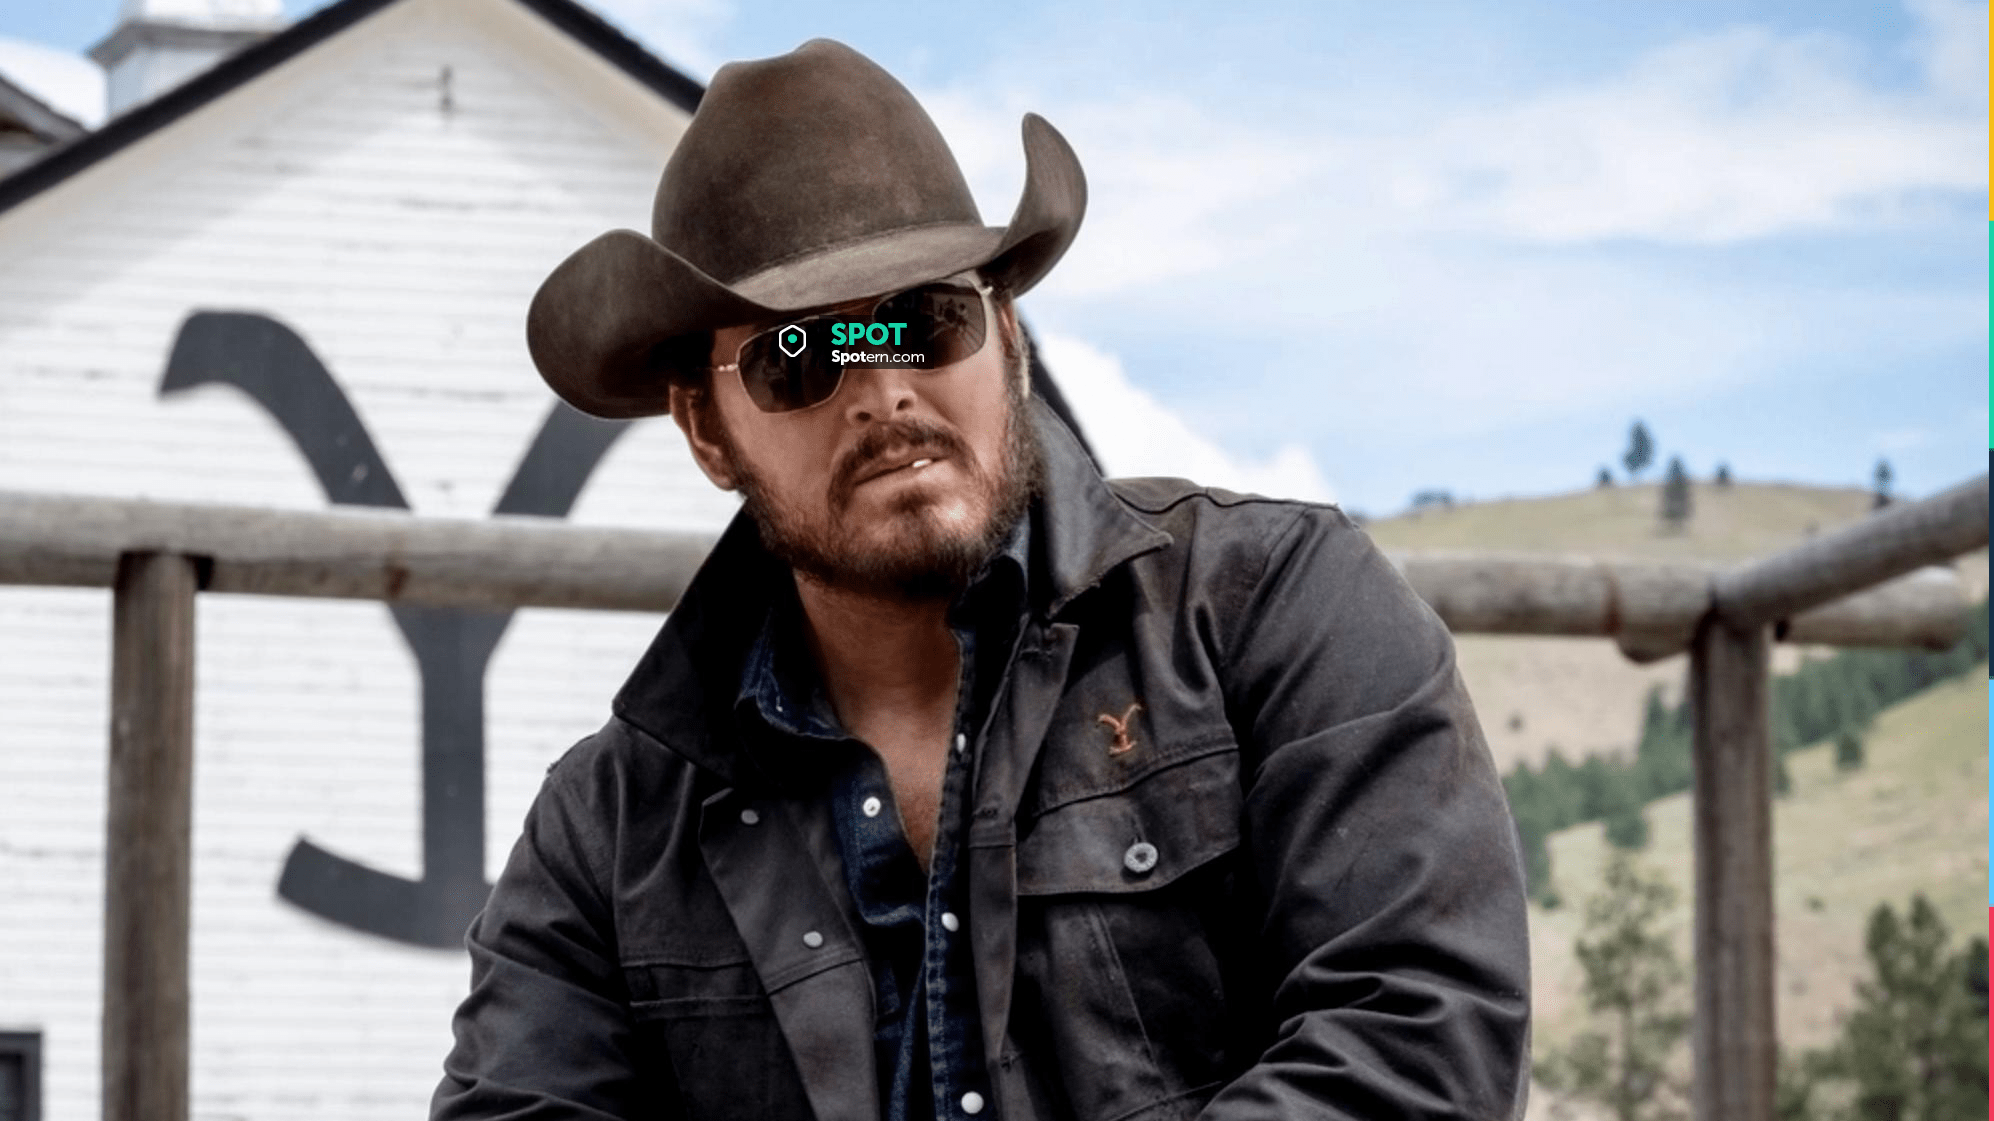 Sunglasses Oliver Peoples Clifton worn by Rip Wheeler (Cole Hauser) in the  series Yellowstone (Season 3 Episode 1) | Spotern